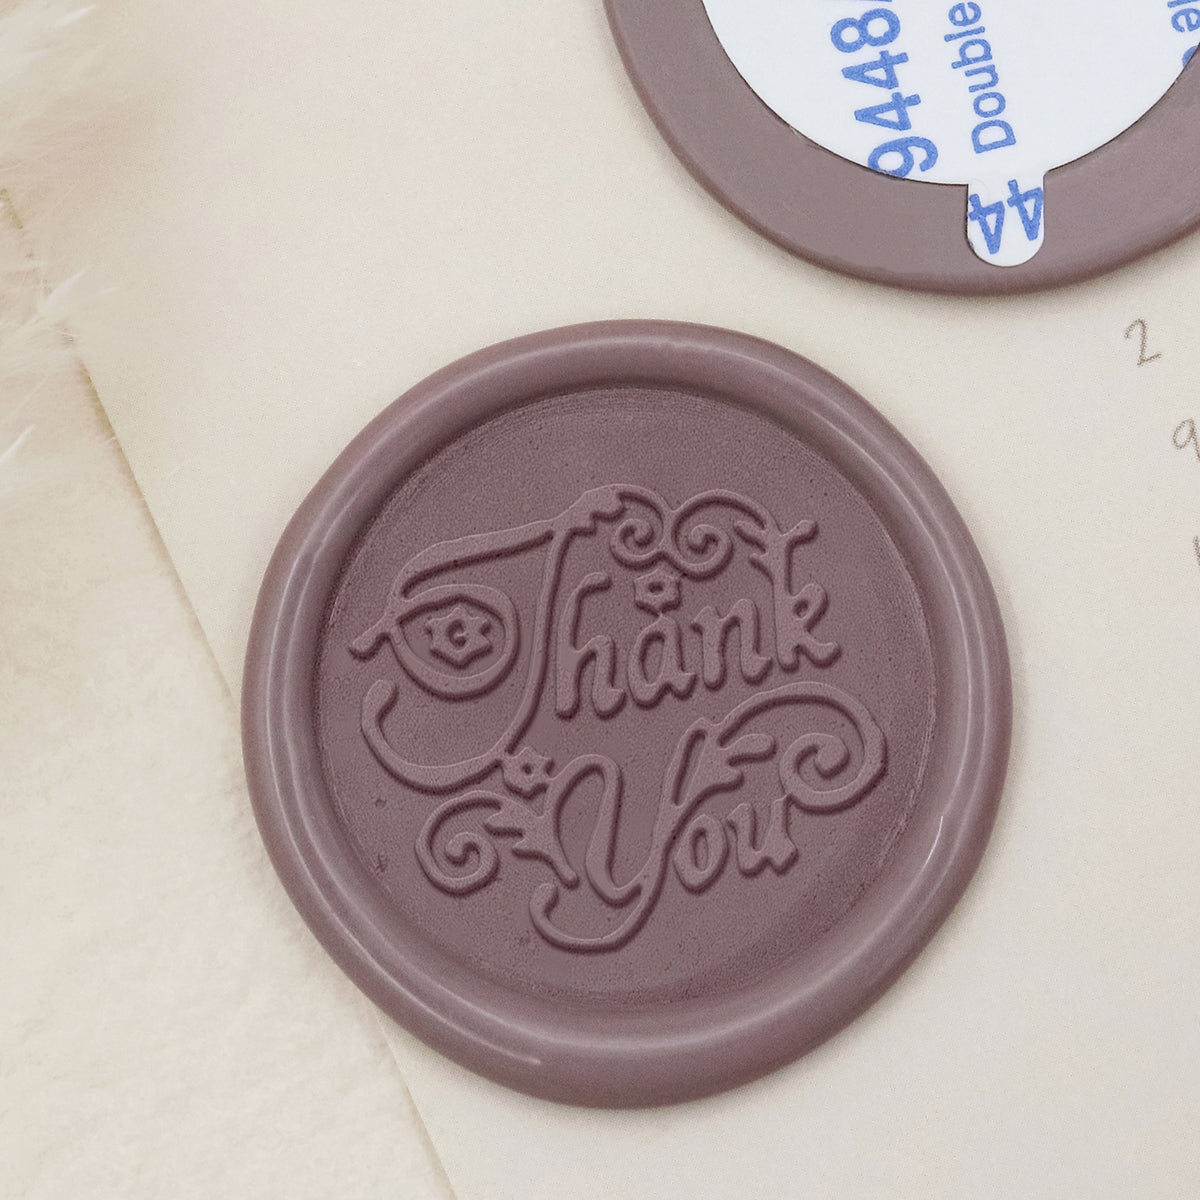 Stamprints Greeting Self-adhesive Wax Seal Stickers - Thank You 1